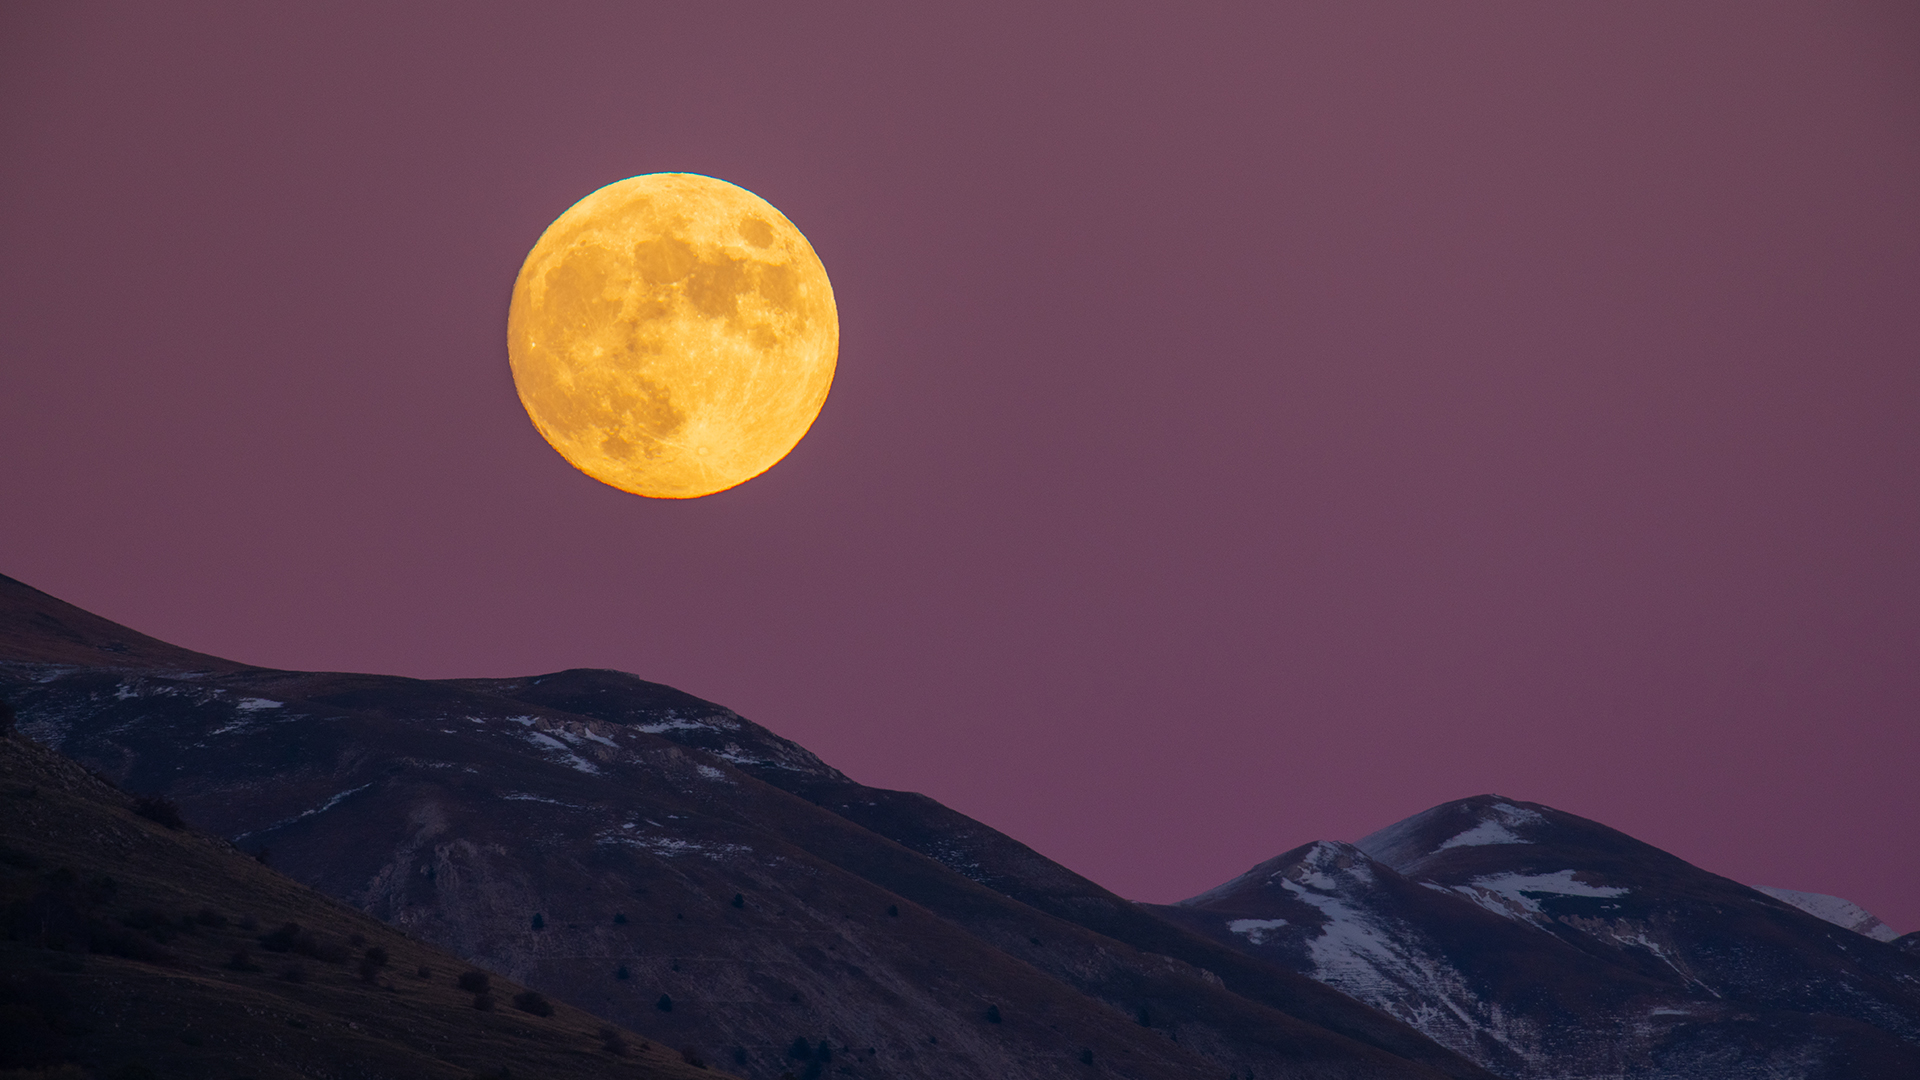 April's pink full moon will shine bright tonight - here's how to